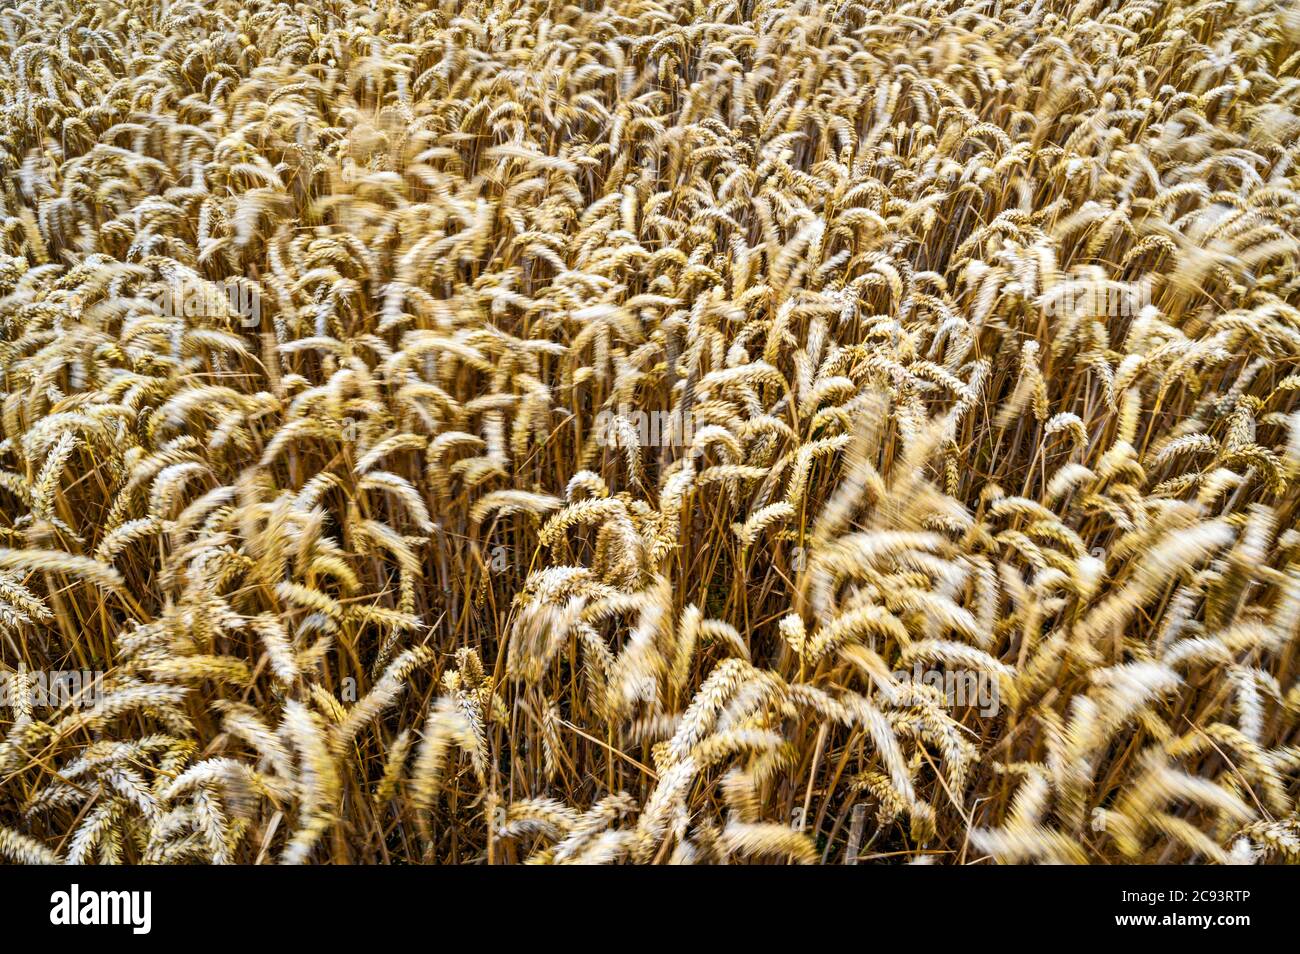 South Downs National Park, Sussex, England, UK. A field of wheat blowing in the wind. Motion blur as the golden wheat is moving. Stock Photo